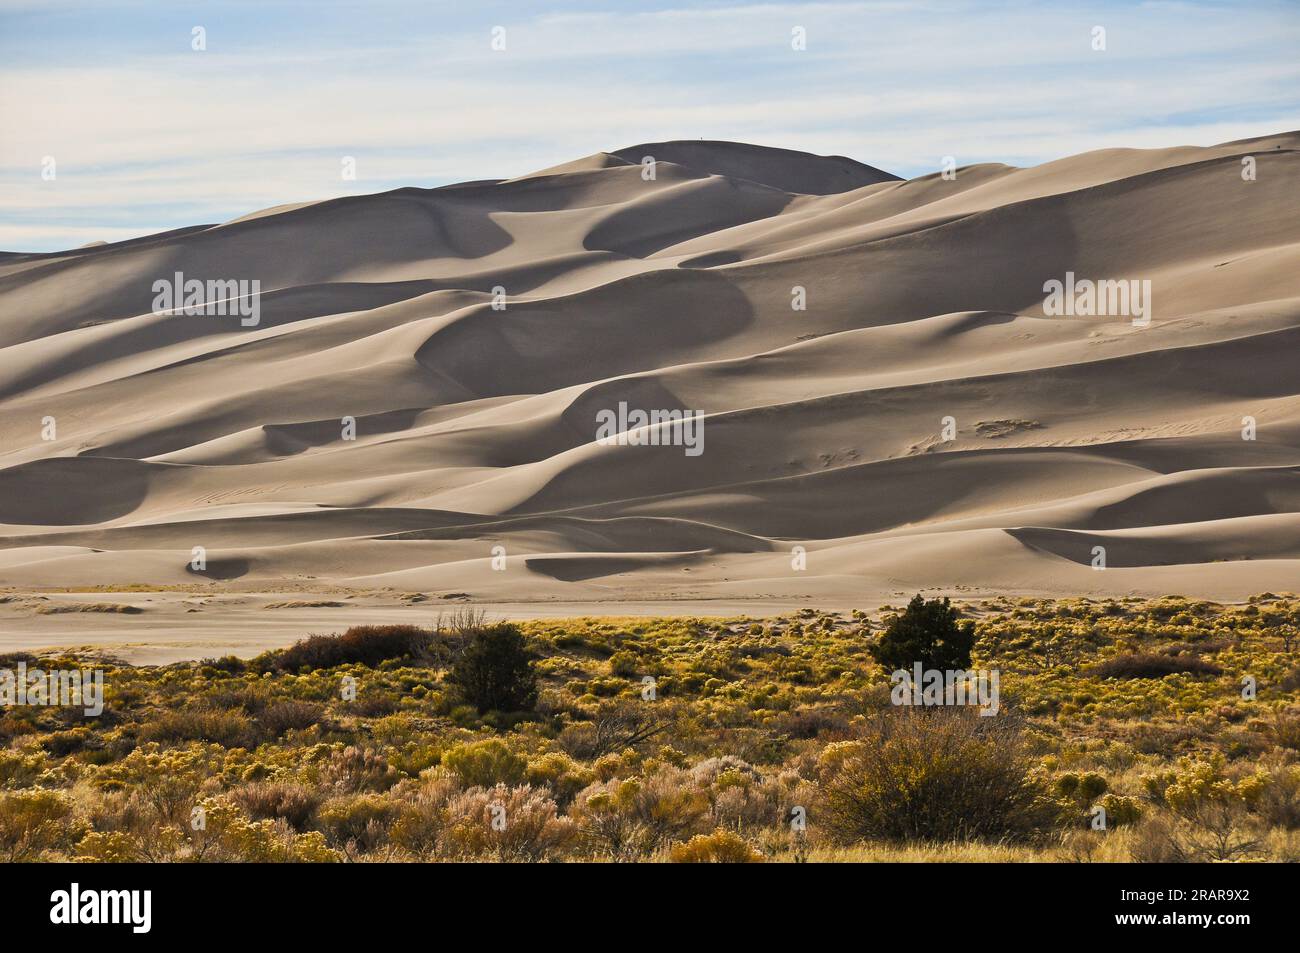 The Great Sand Dunes National Park dune field at sunset in Colorado, USA Stock Photo